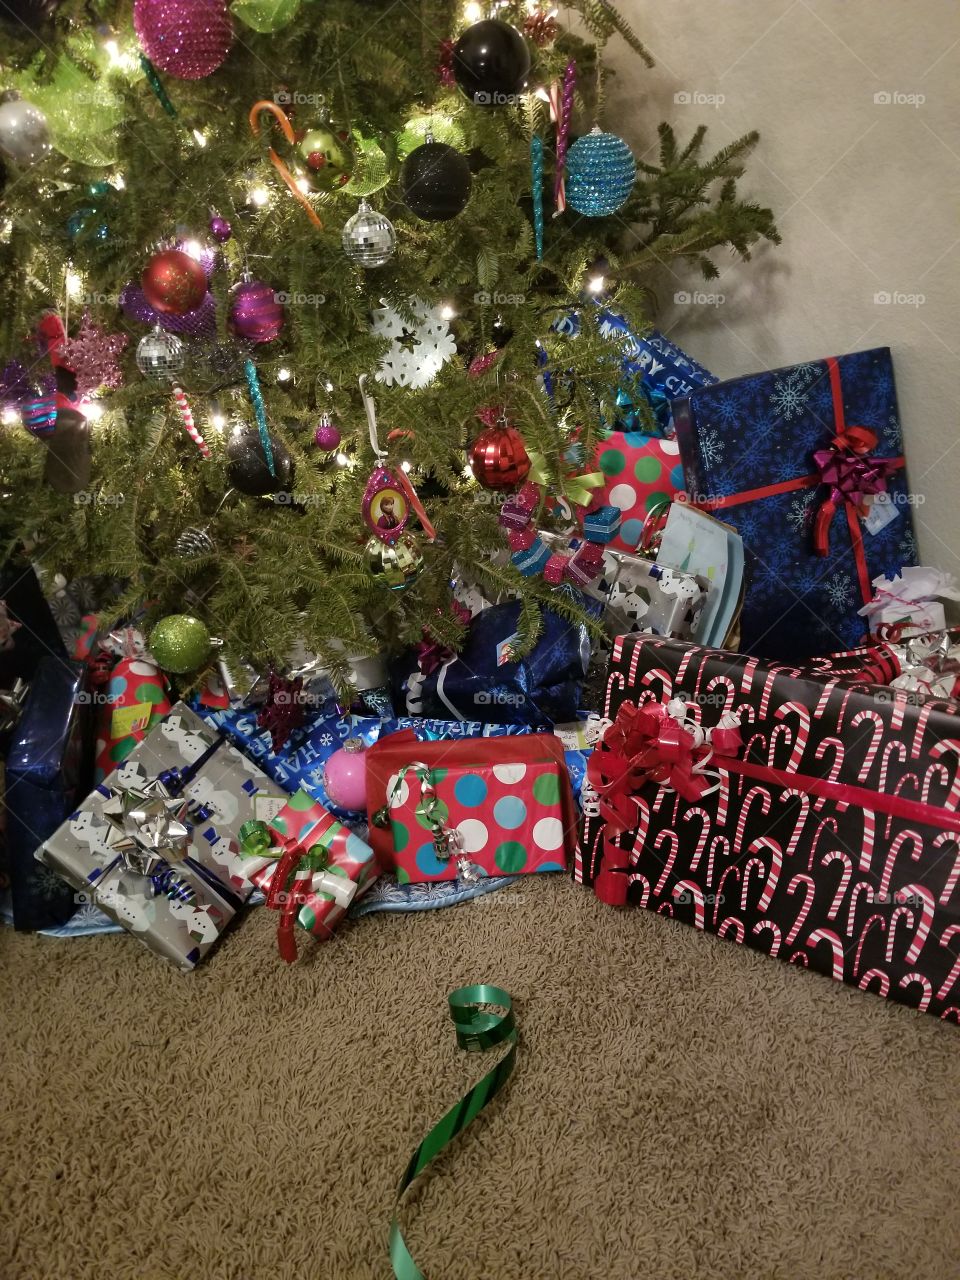 Bottom of the Christmas tree with presents